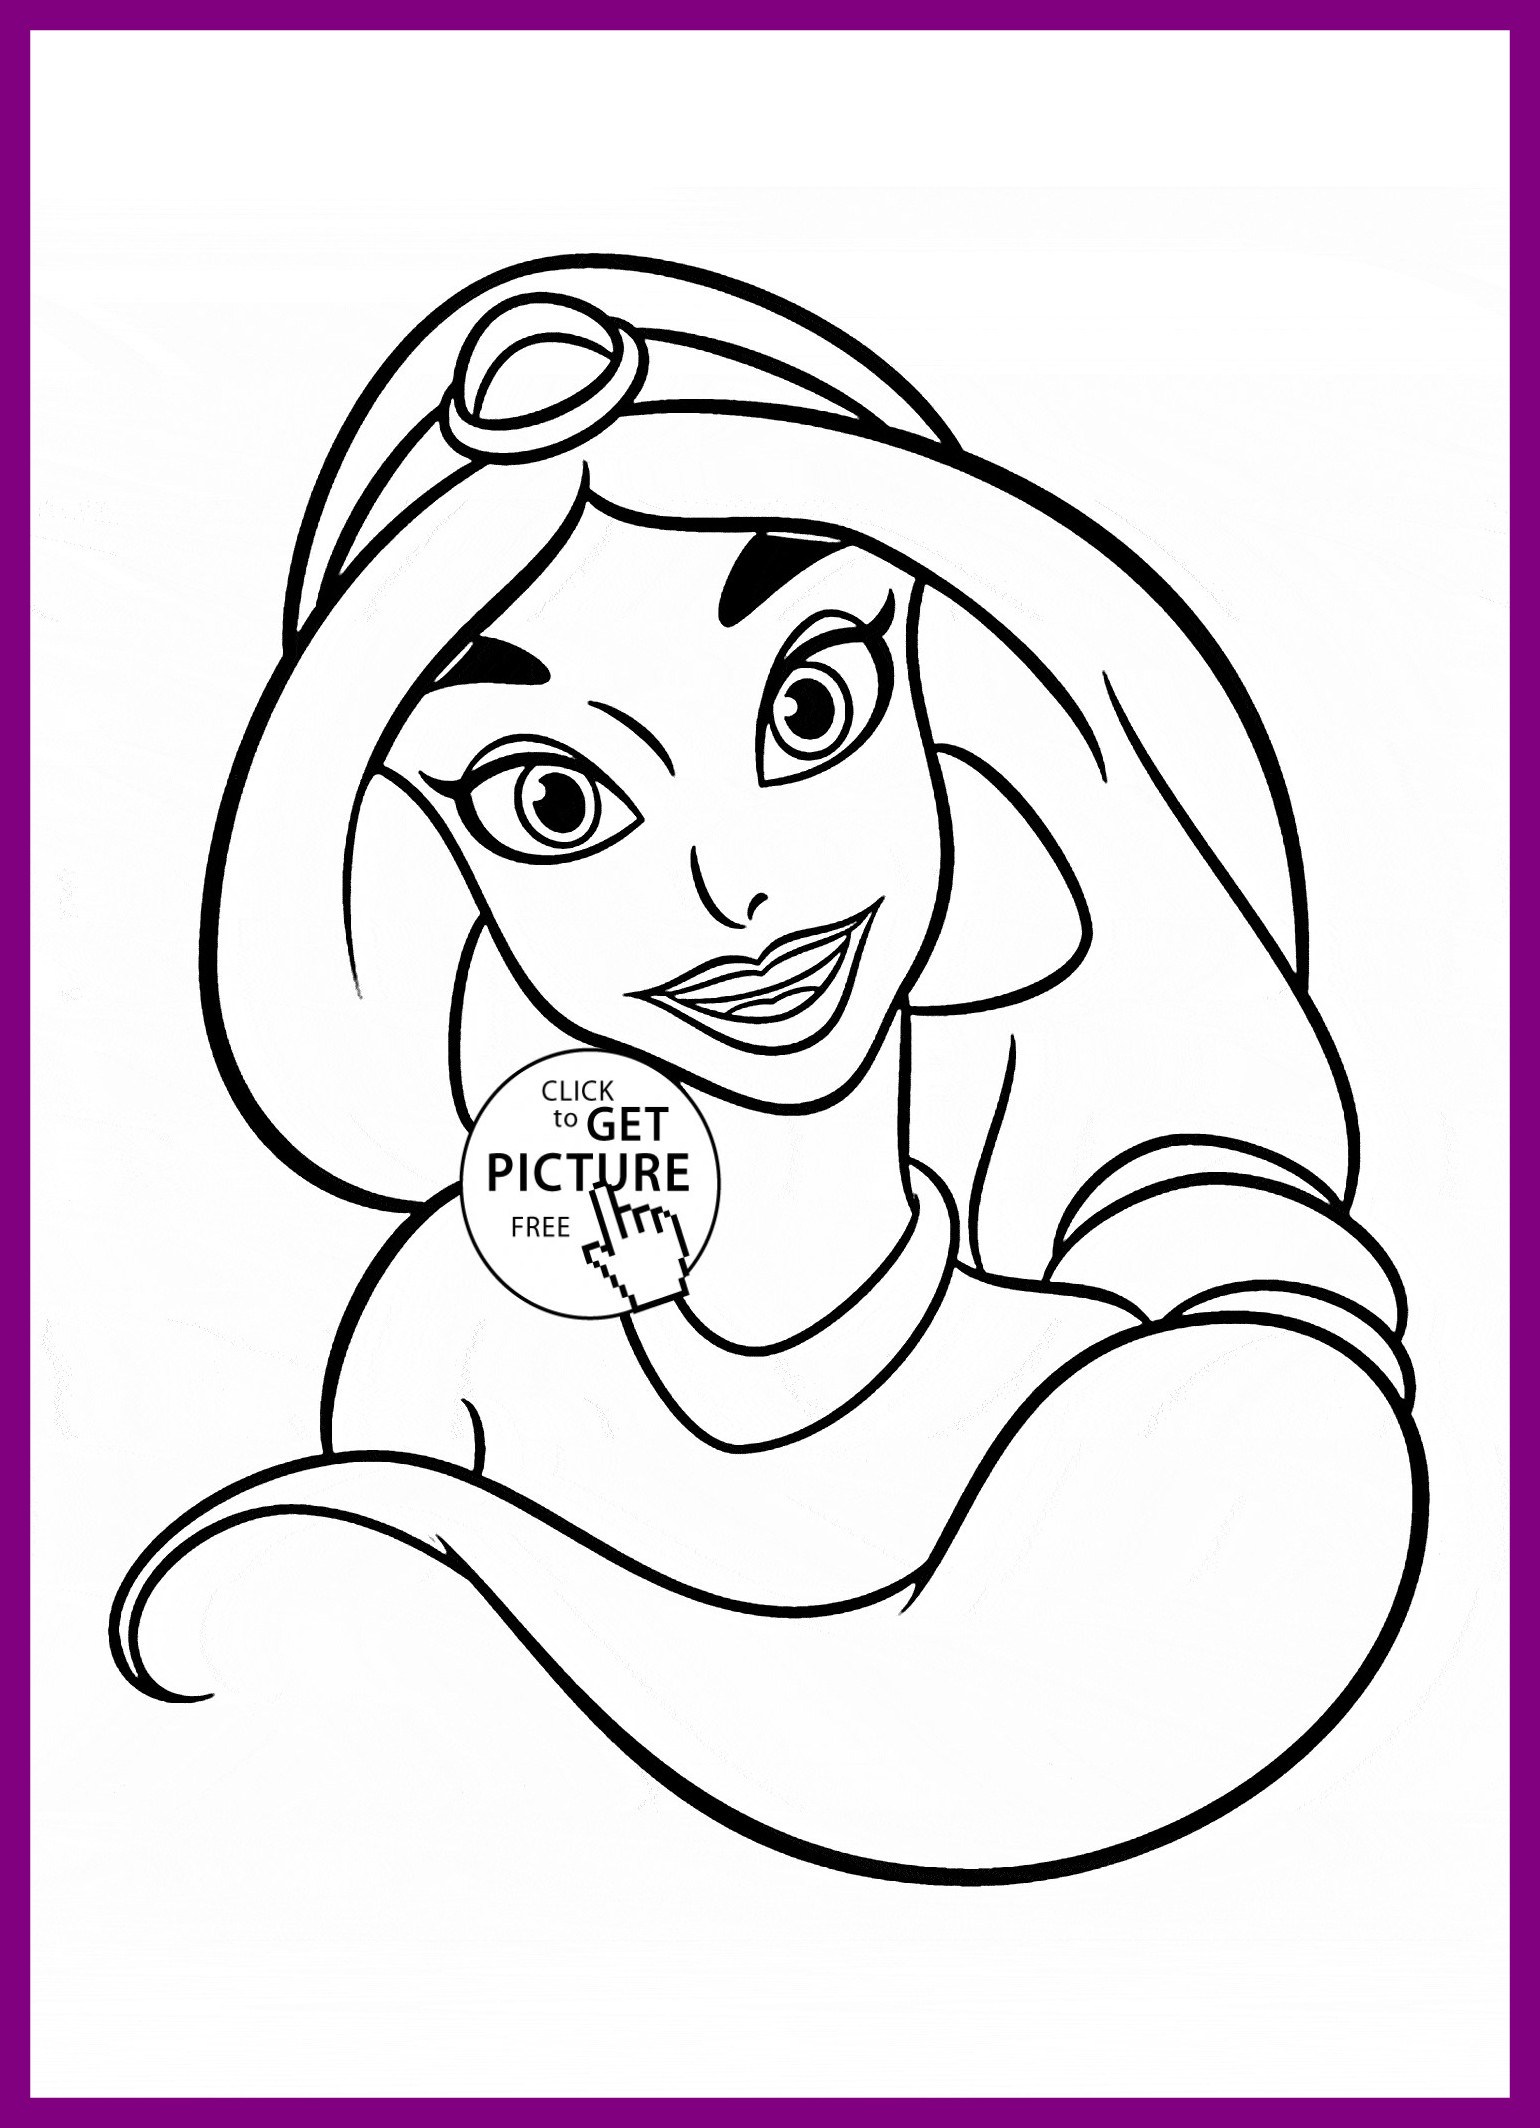 Simple Princess Coloring Pages at GetColorings.com   Free ...